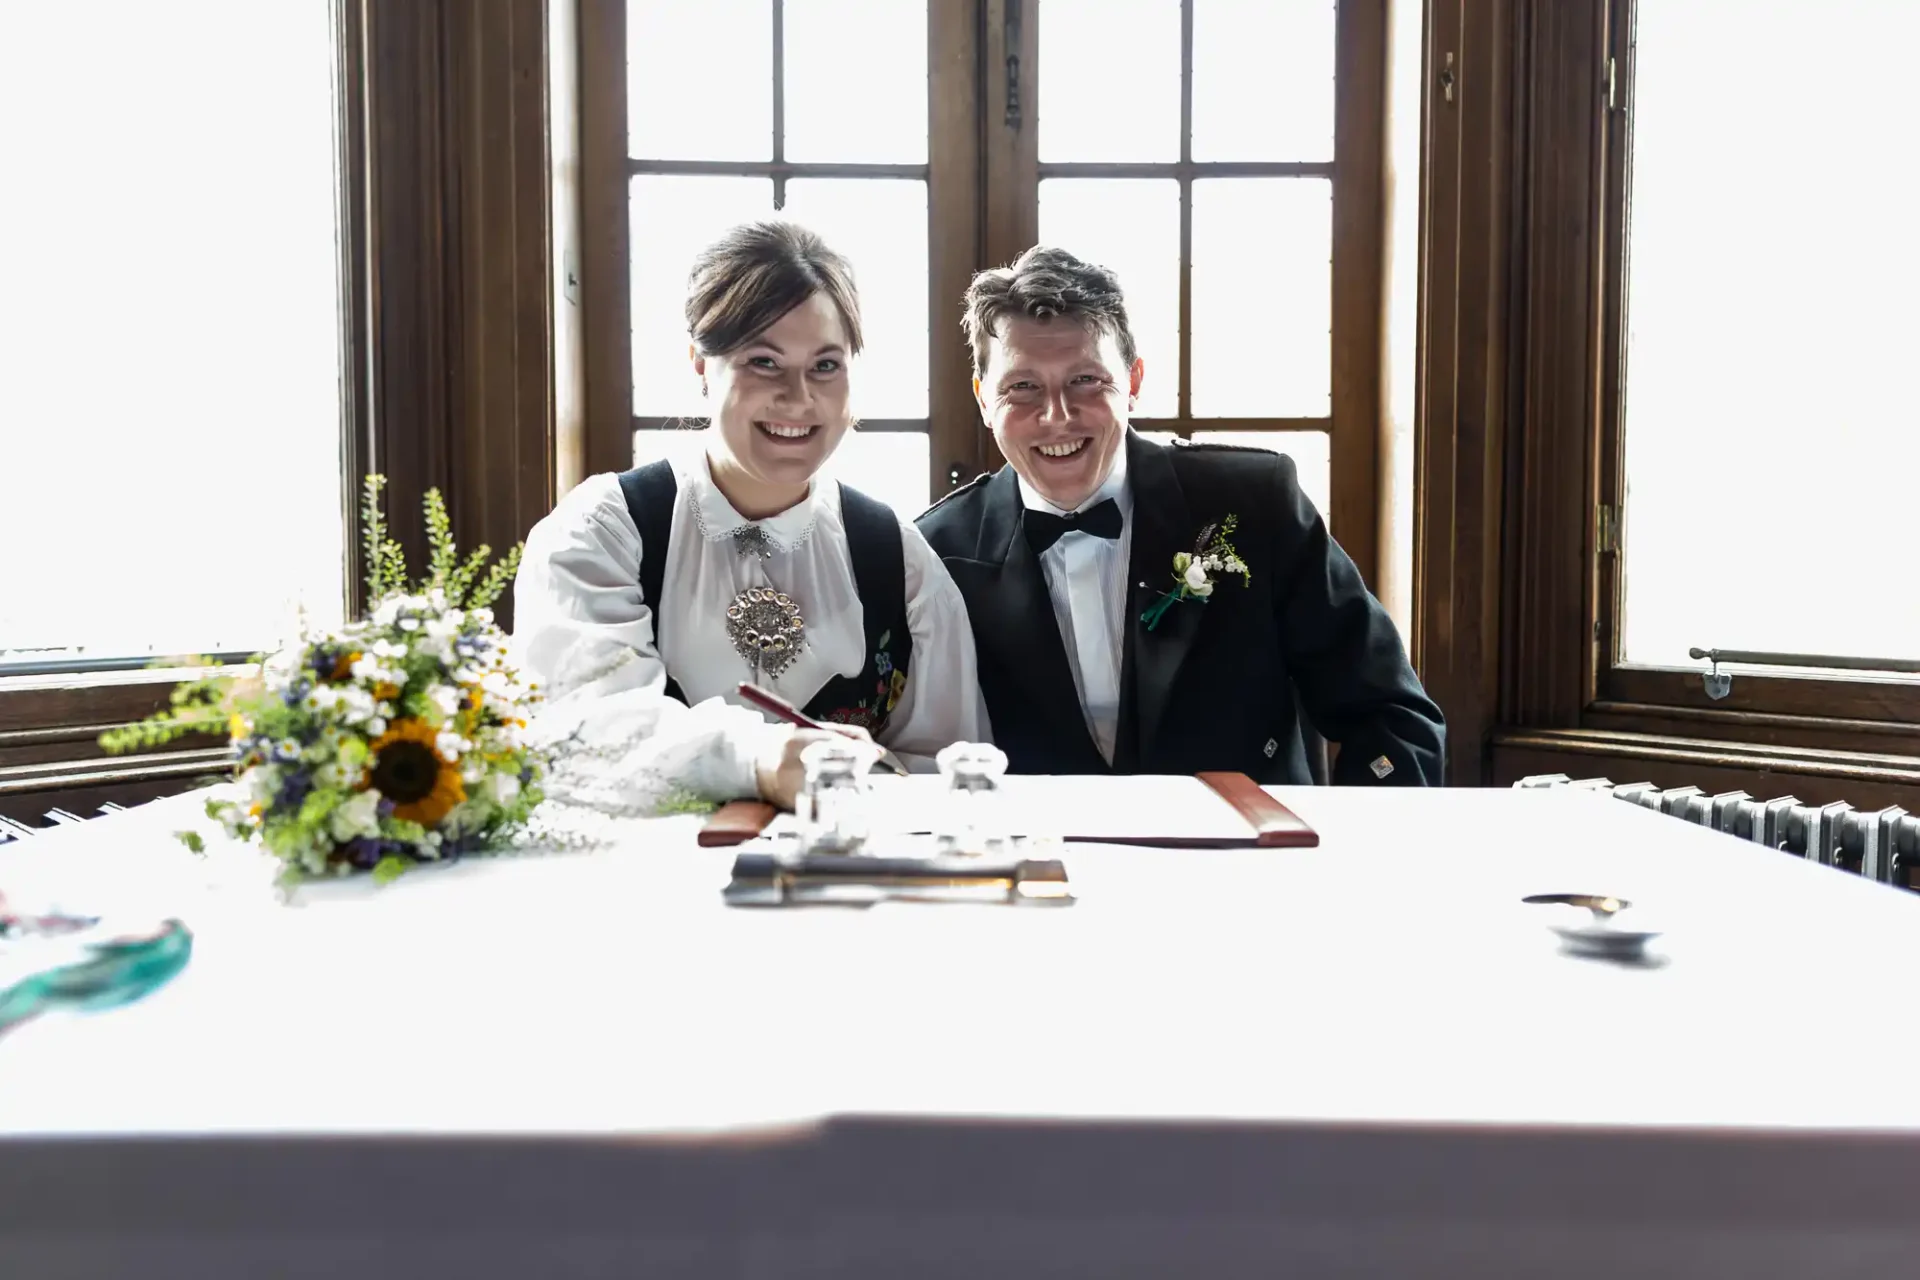 A bride and groom smiling at a signing table with a bouquet and documents, against a bright window background.